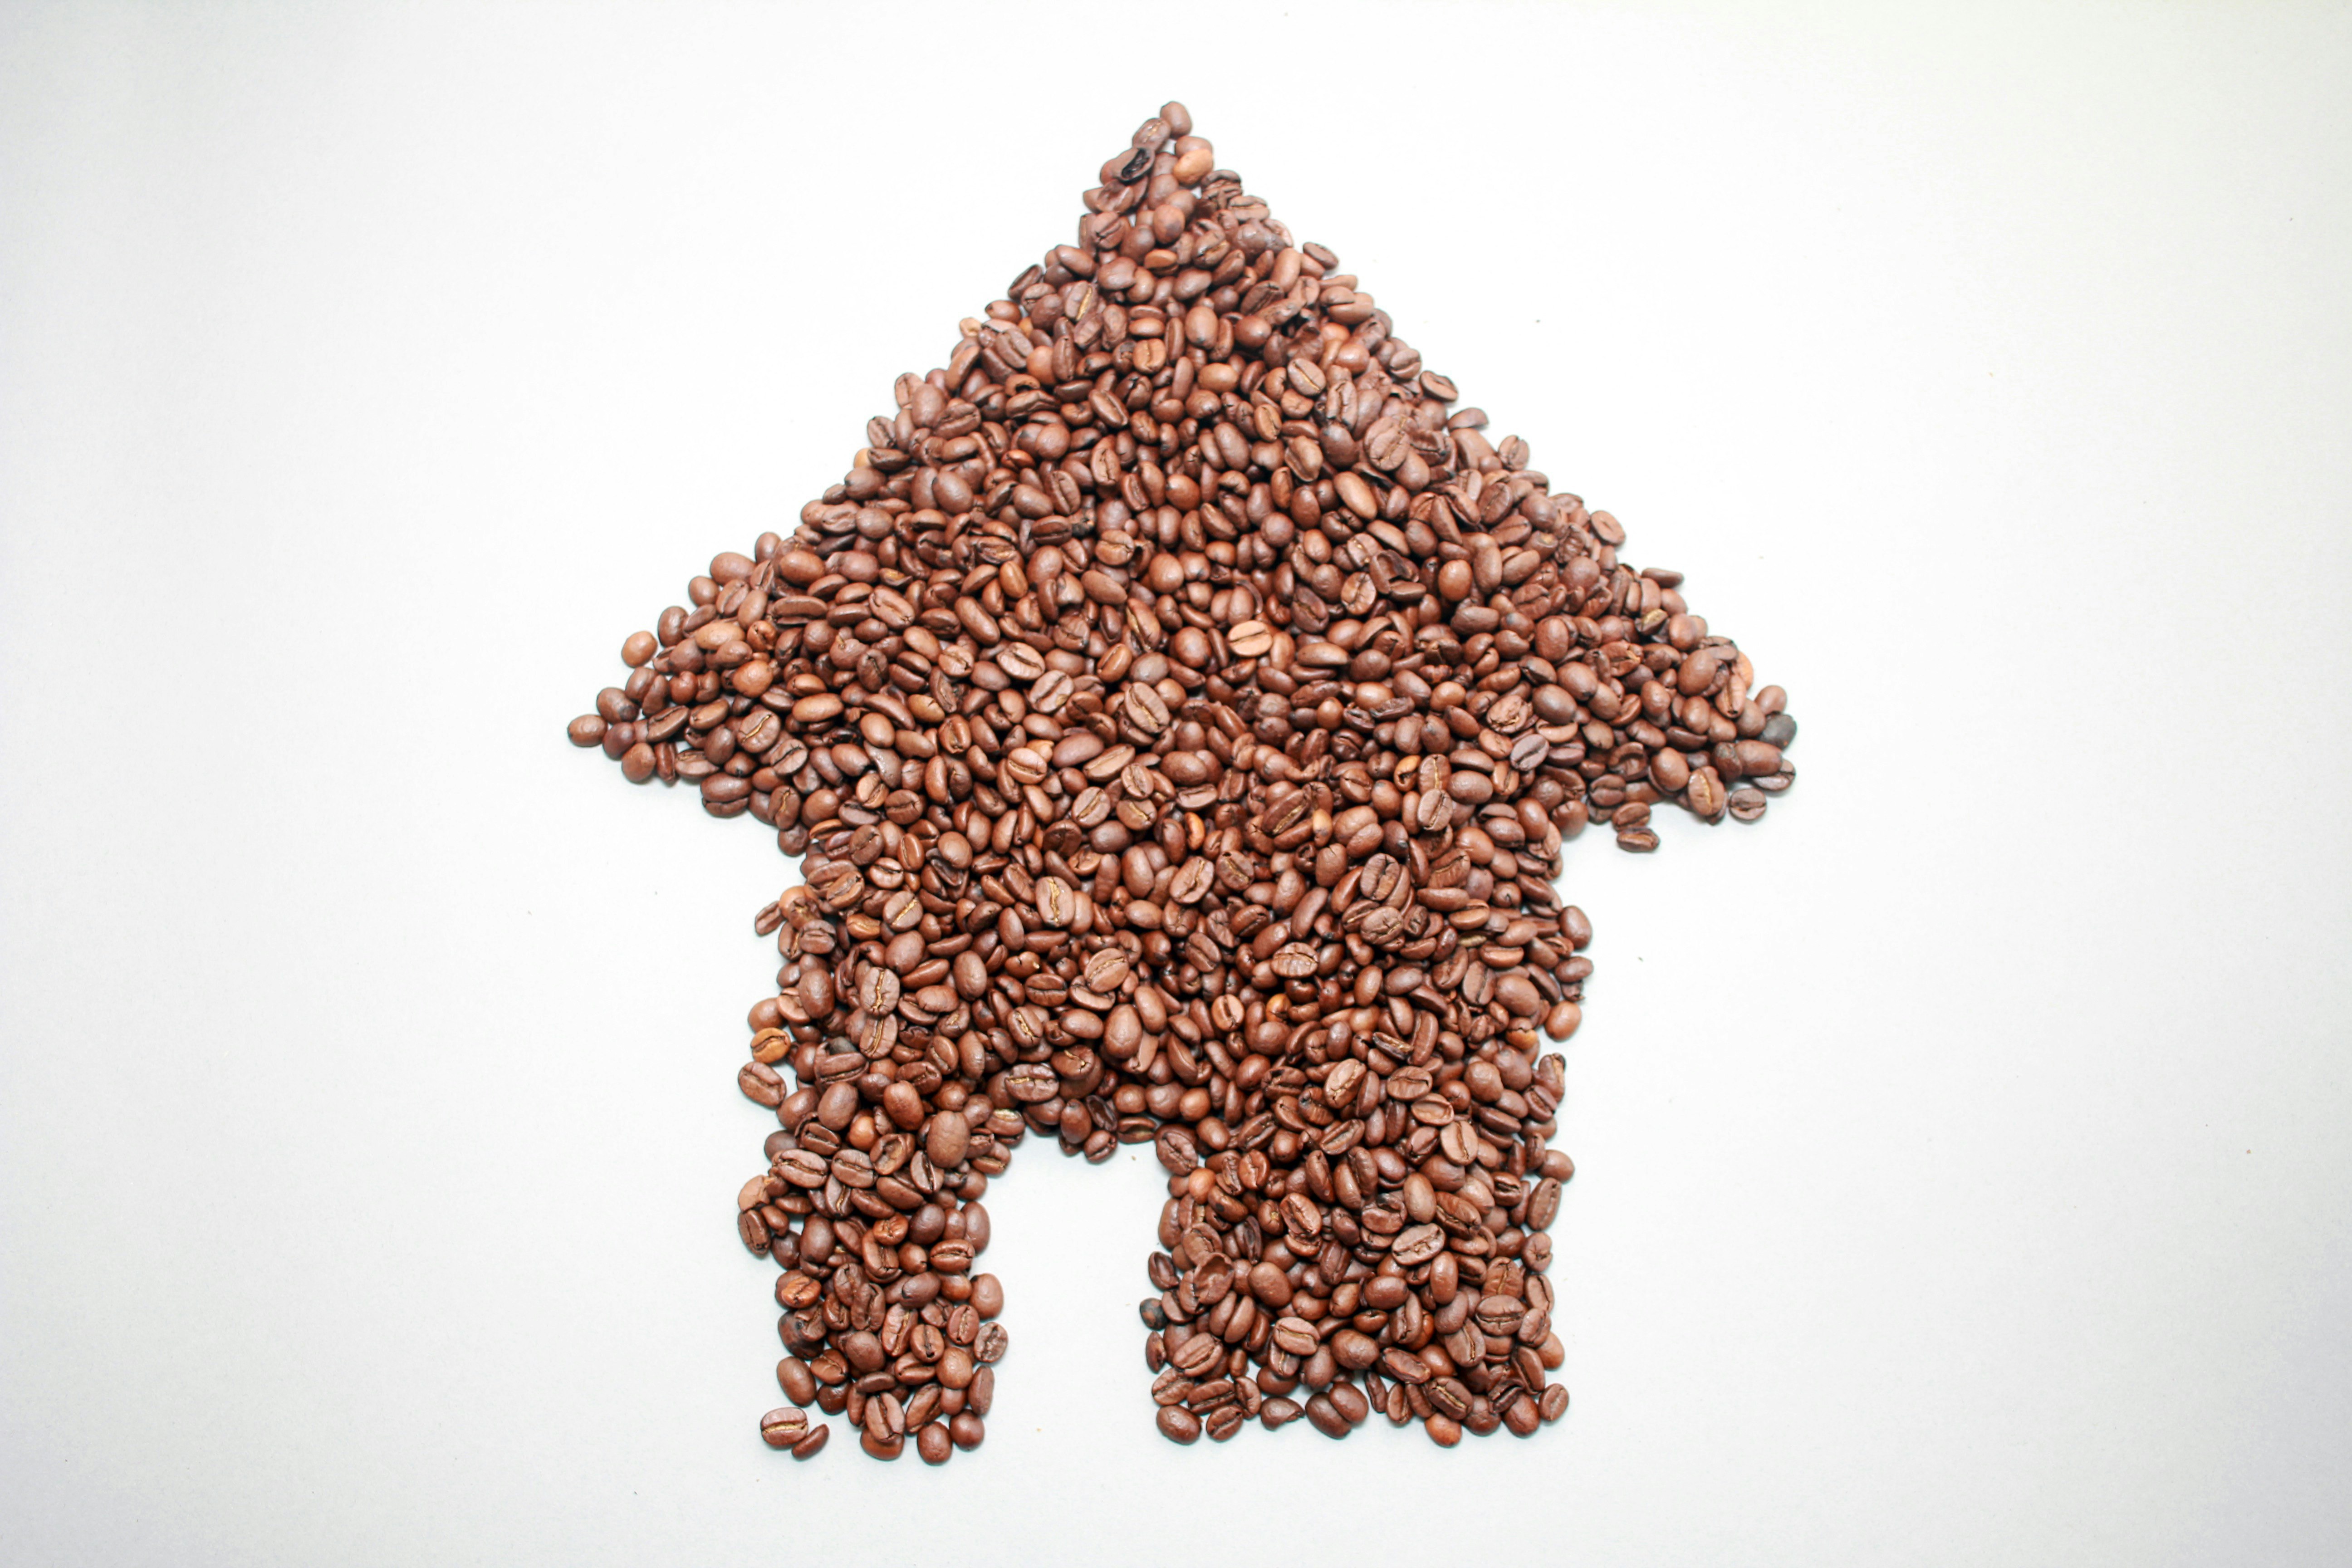 house-shaped brown coffee beans